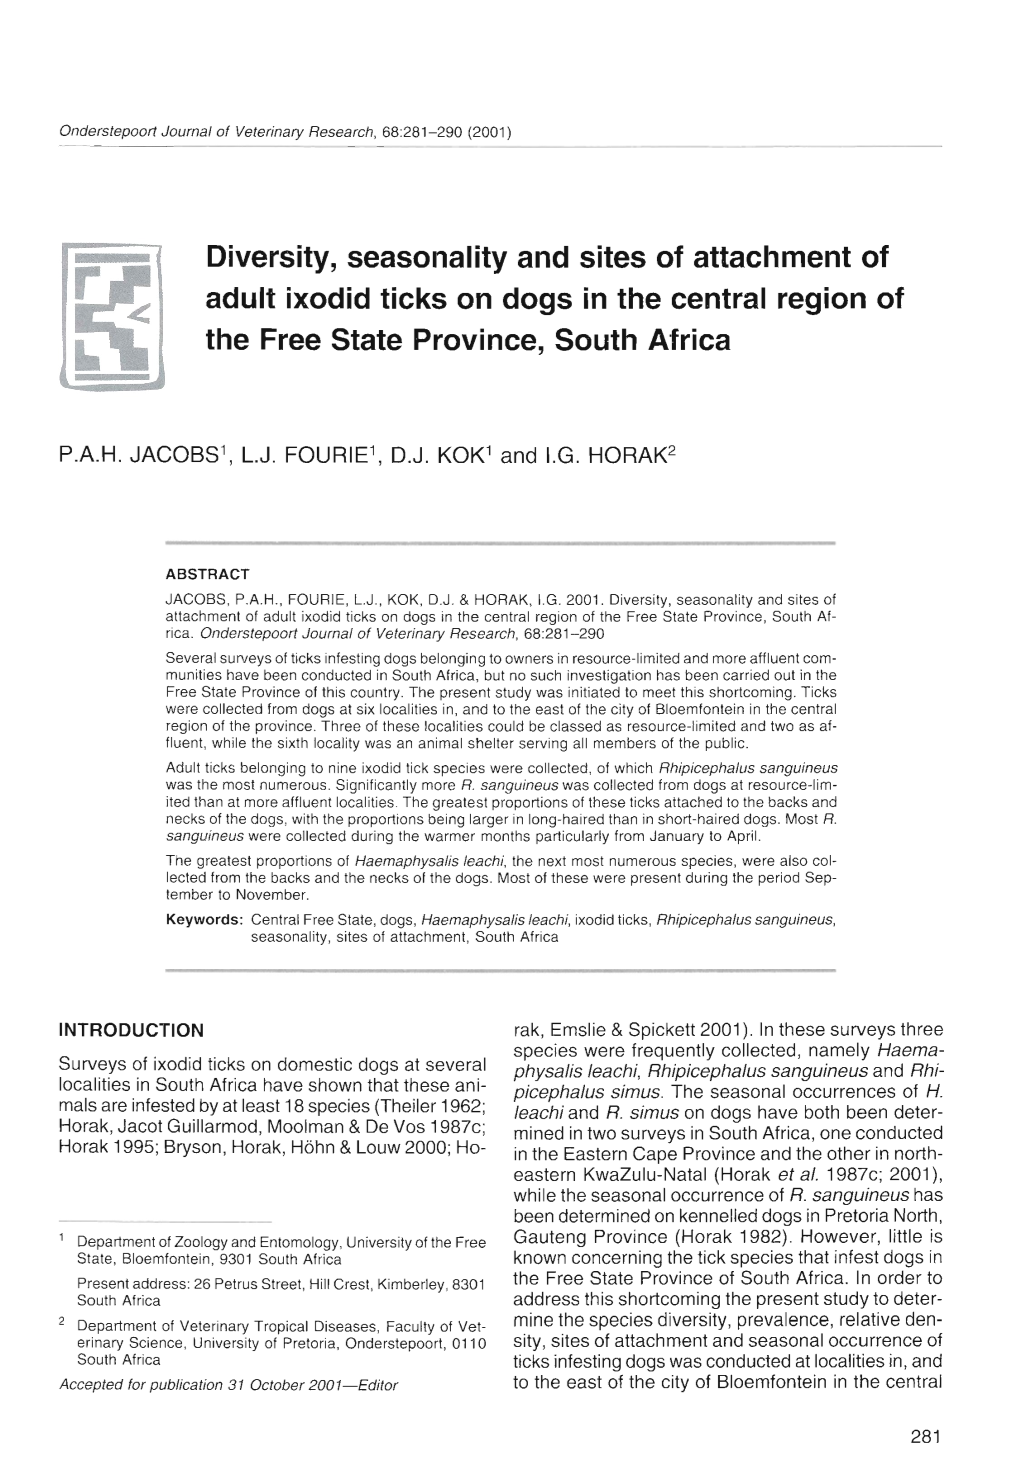 Diversity, Seasonality and Sites of Attachment of Adult Ixodid Ticks on Dogs in the Central Region of the Free State Province, South Africa